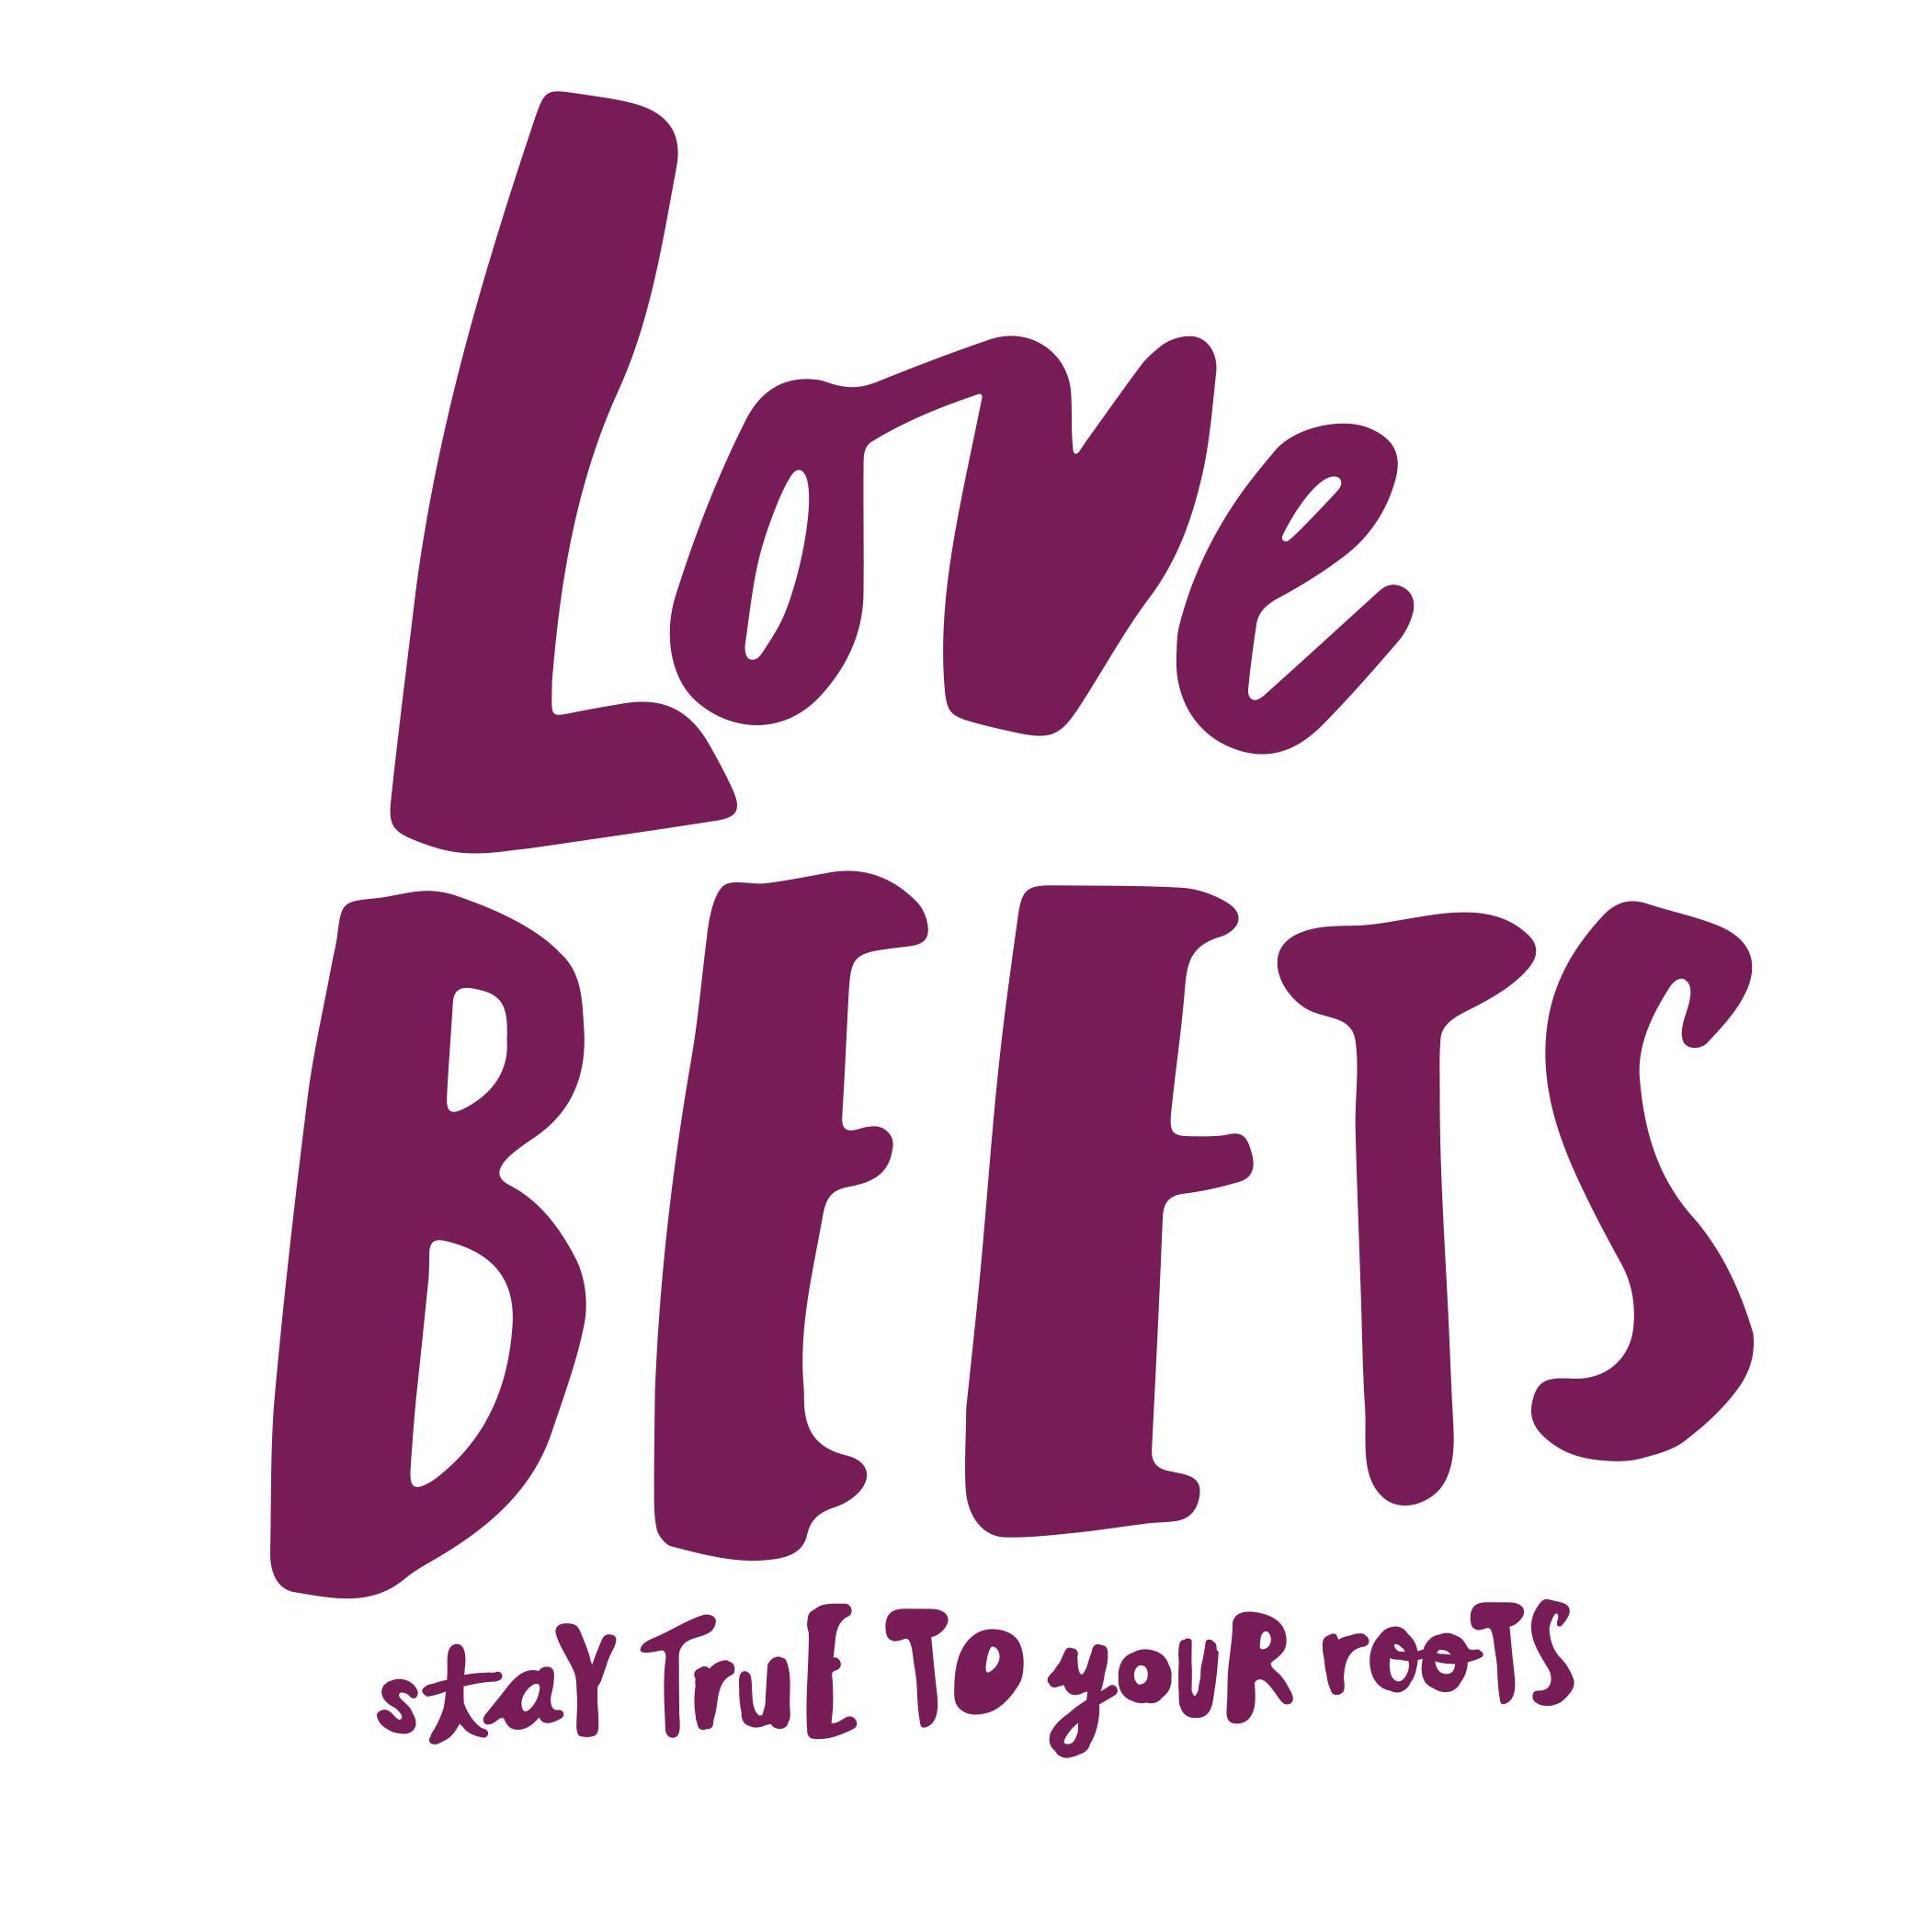 Love Beets ready-to-eat beets are the no mess, no fuss way to enjoy delicious, nutritious beetroot!